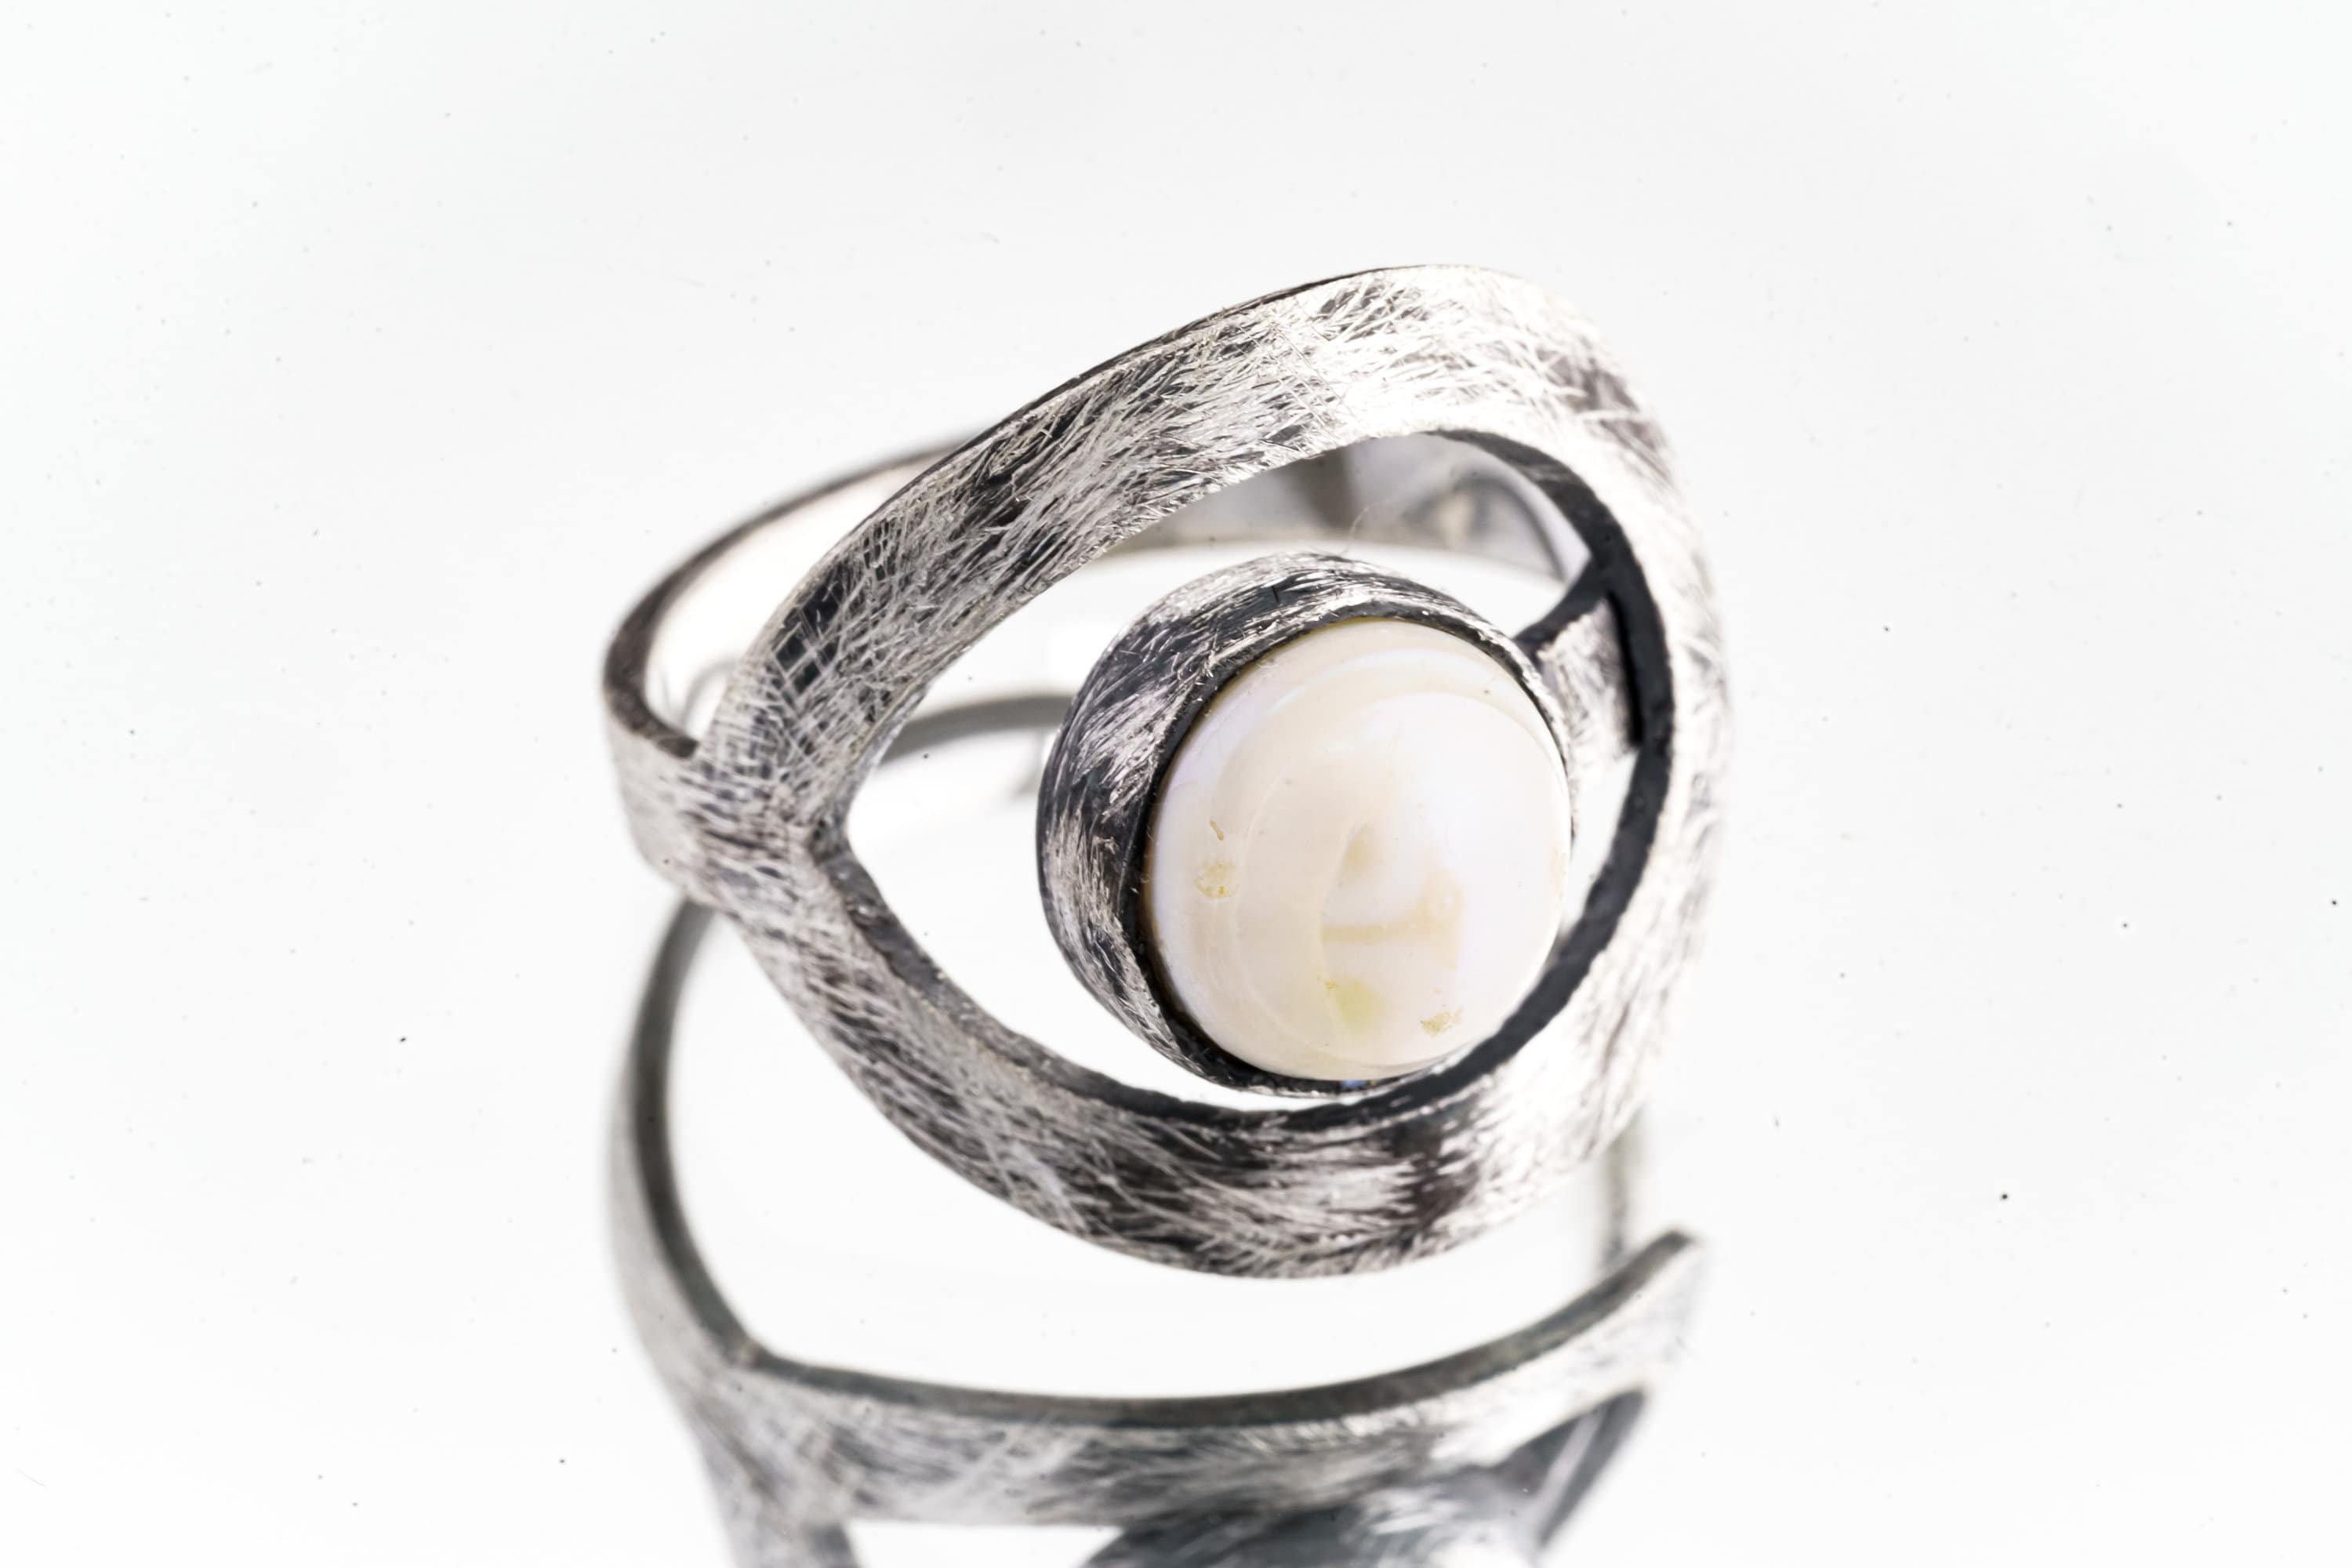 Round Natural Pearl - 925 Sterling Silver - Heavy Set Adjustable Loop Ring - Scratch Textured - Size 5-9 US - NO/19